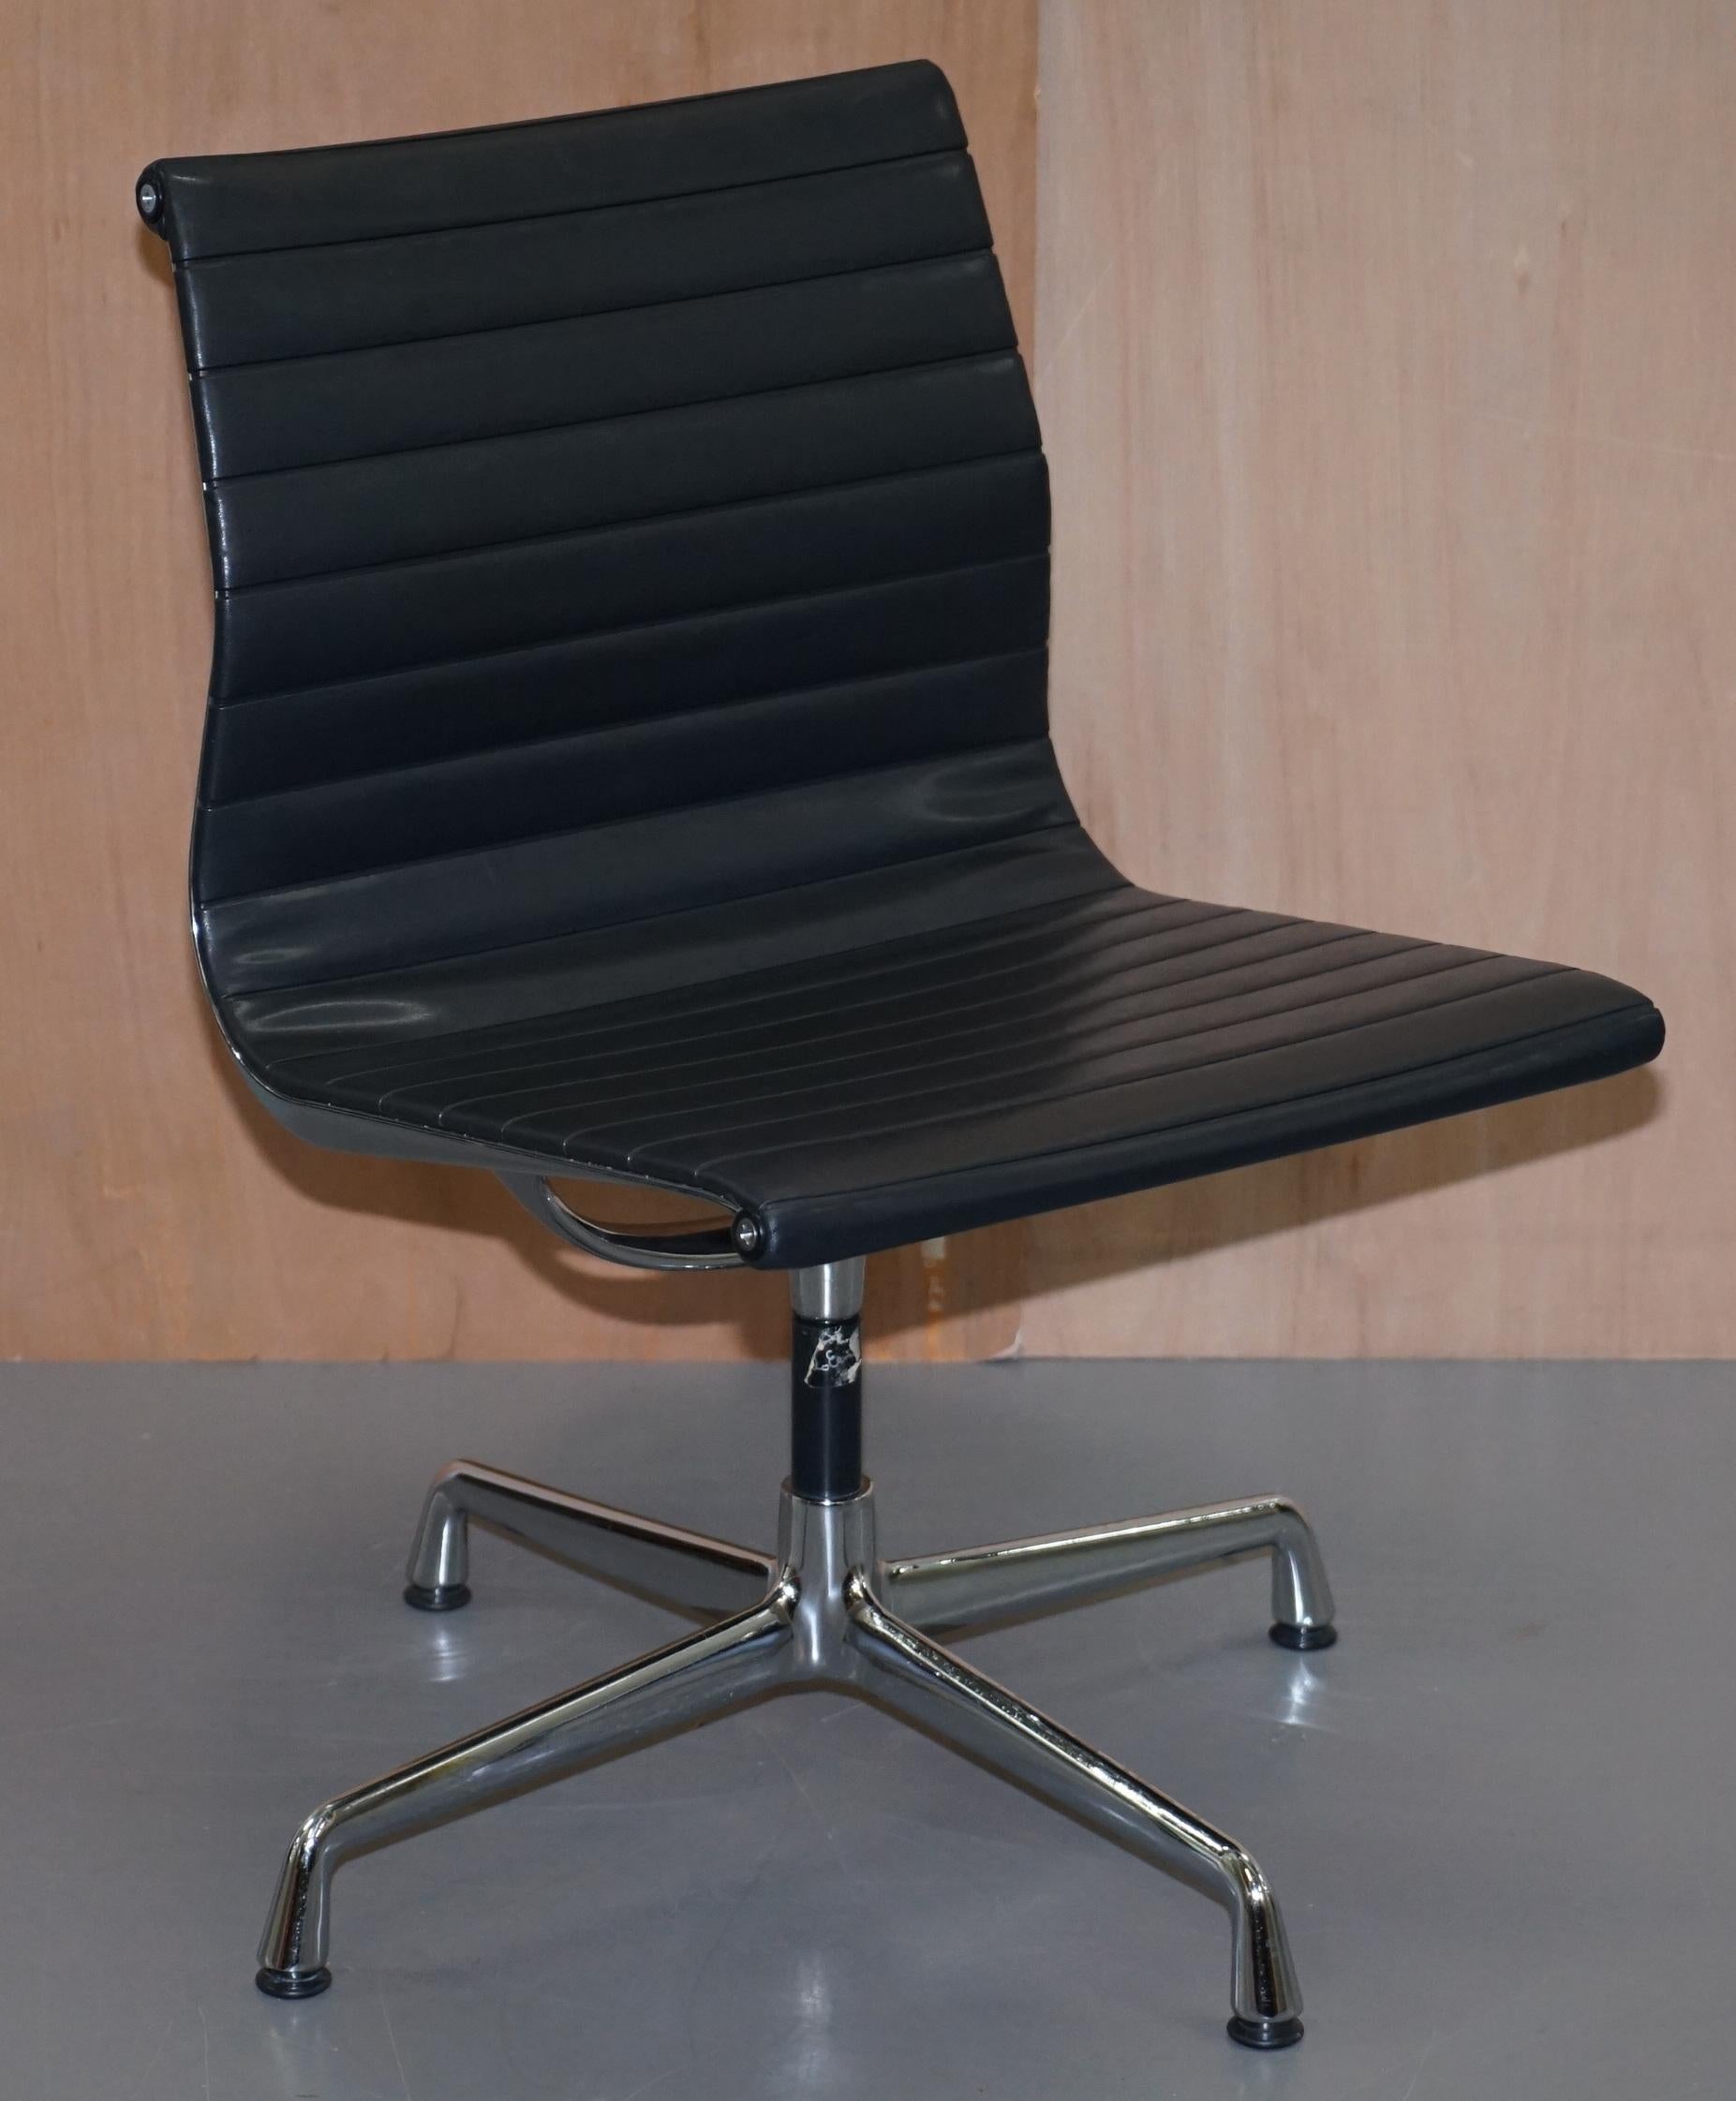 1 of 2  EA101 Vitra Eames Black Leather Office Swivel Conference Chairs 4